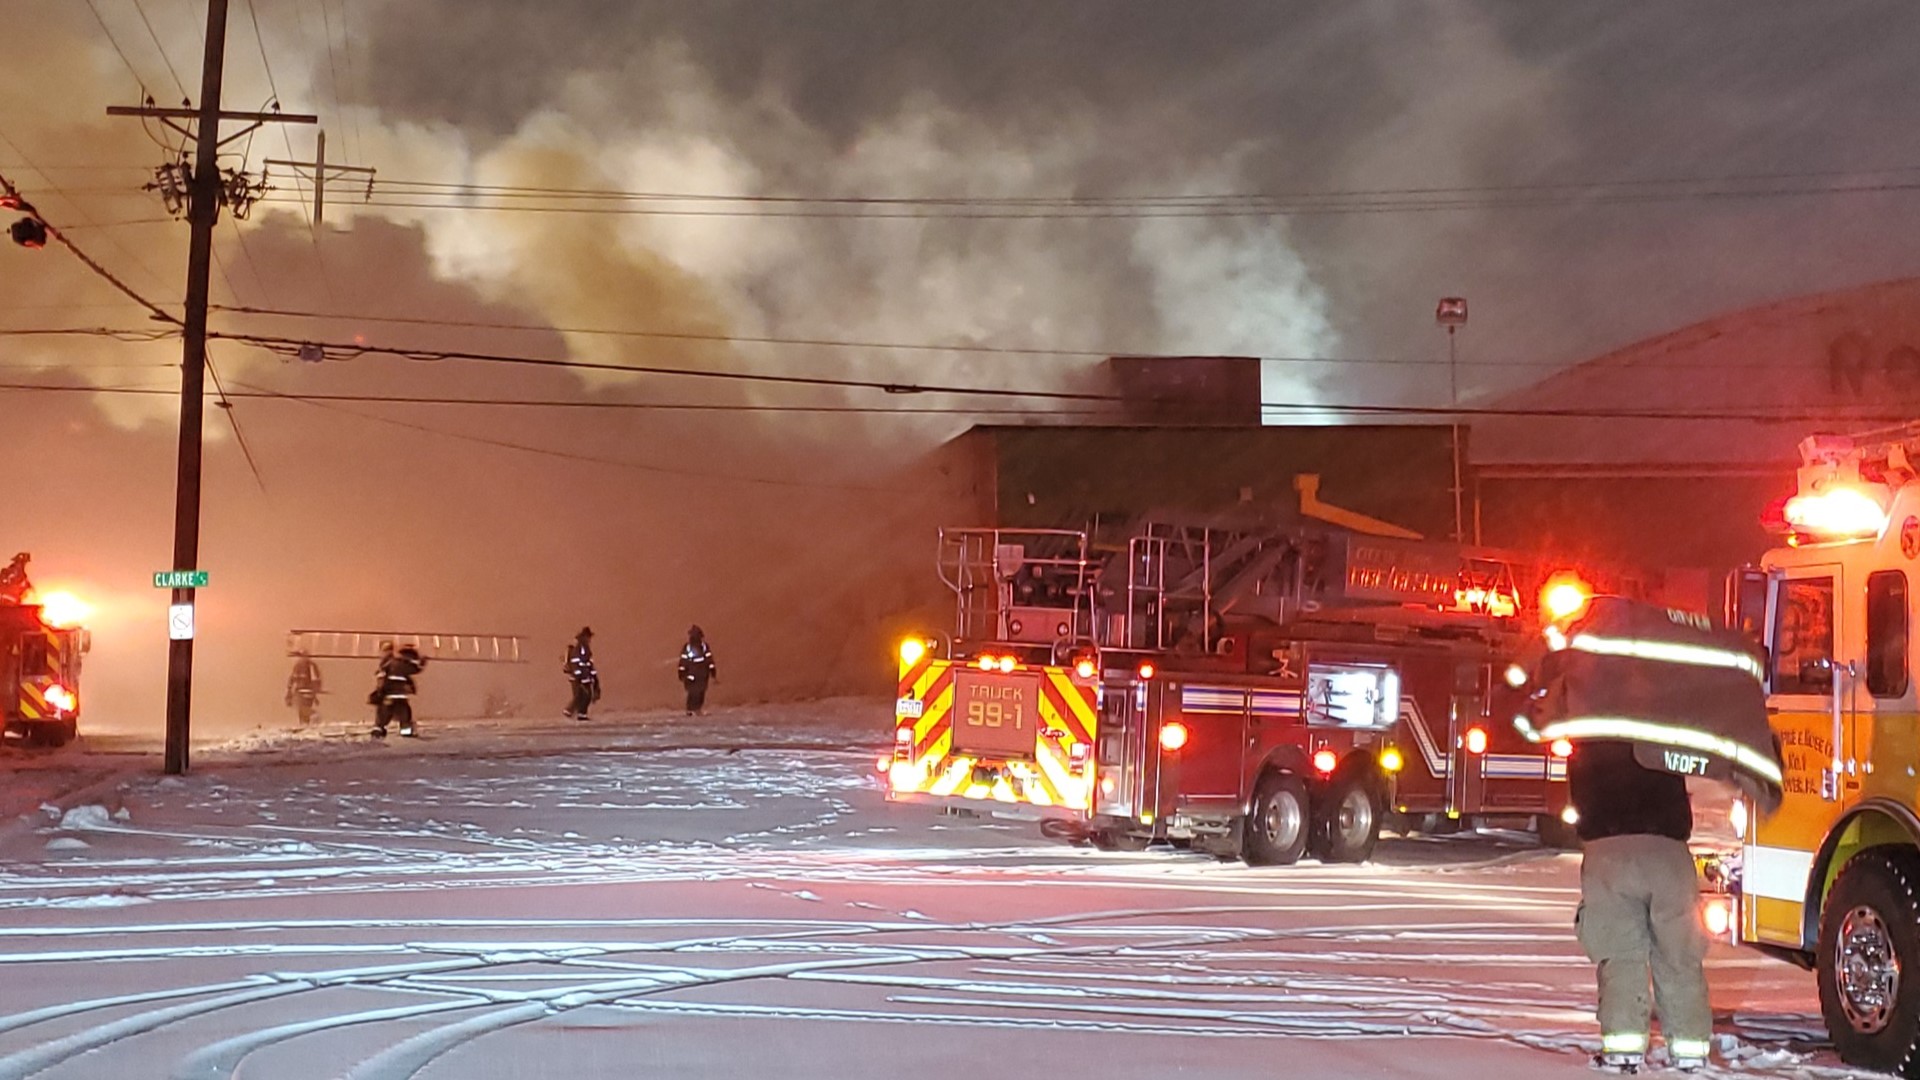 Emergency dispatch says the fire was reported at around 7:10 p.m. on Sunday night at Mr. Q's Family Skate Center in West Manchester Township.